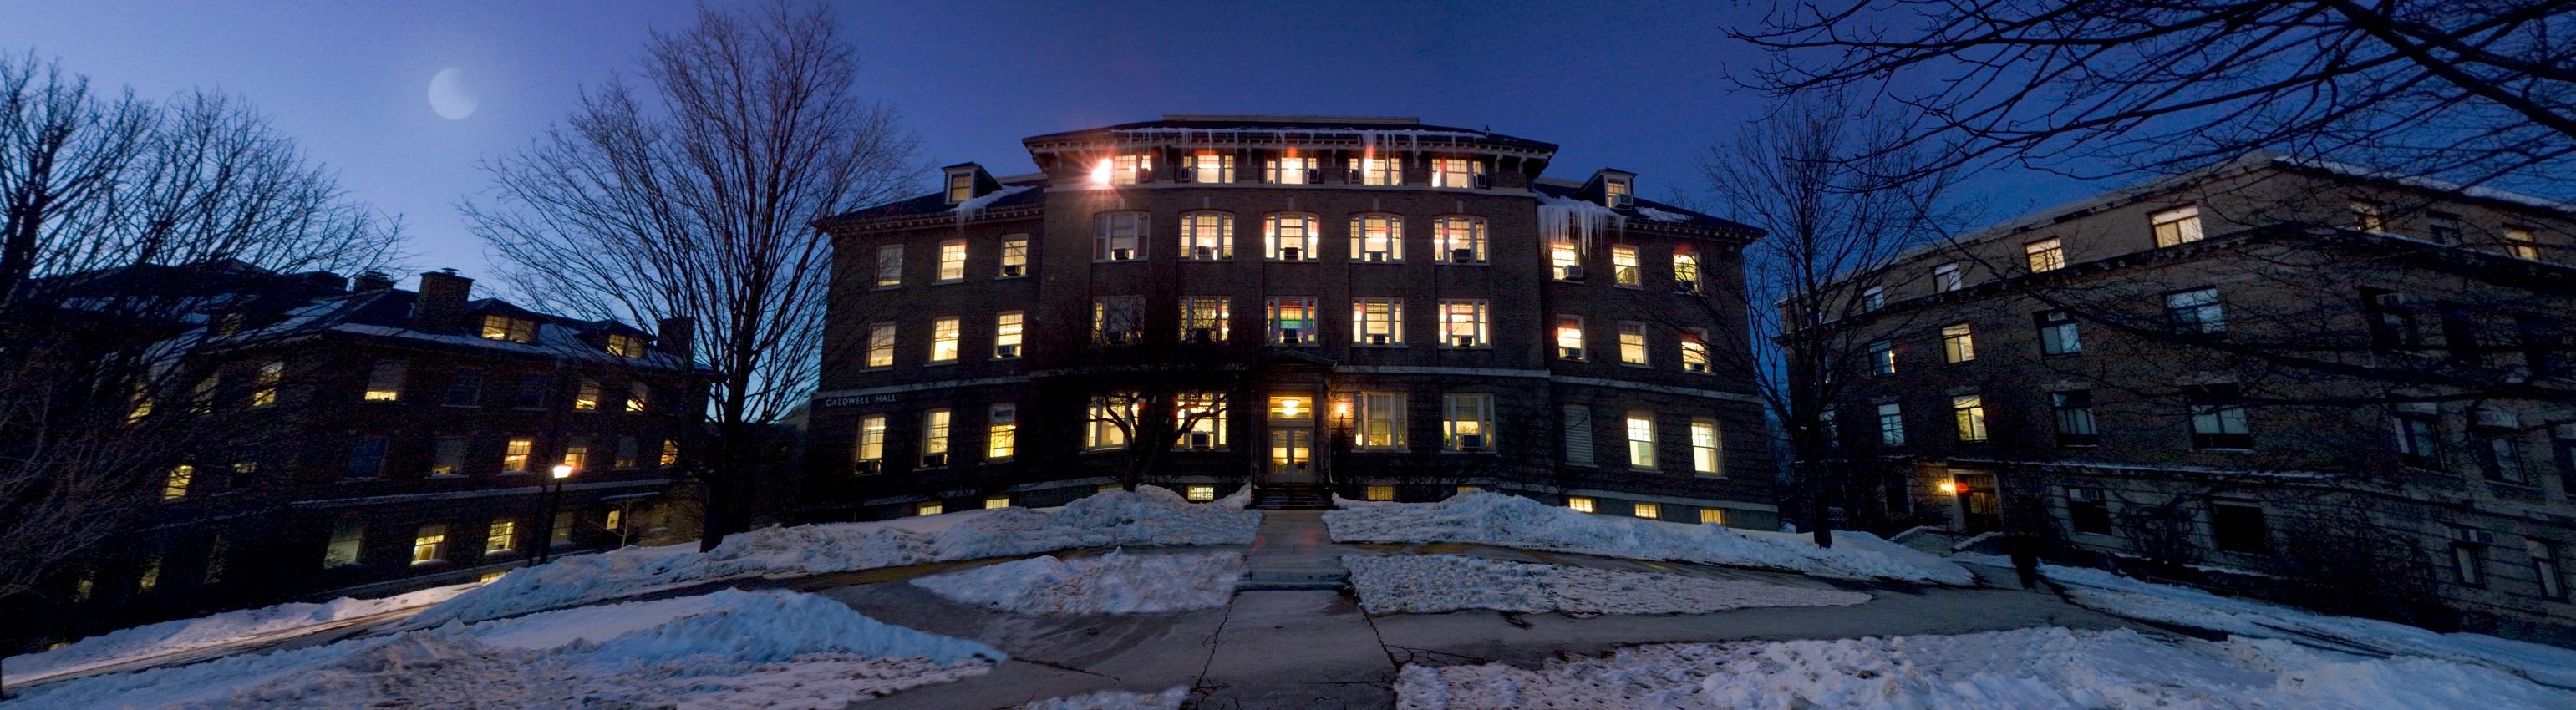 Caldwell Hall in Winter